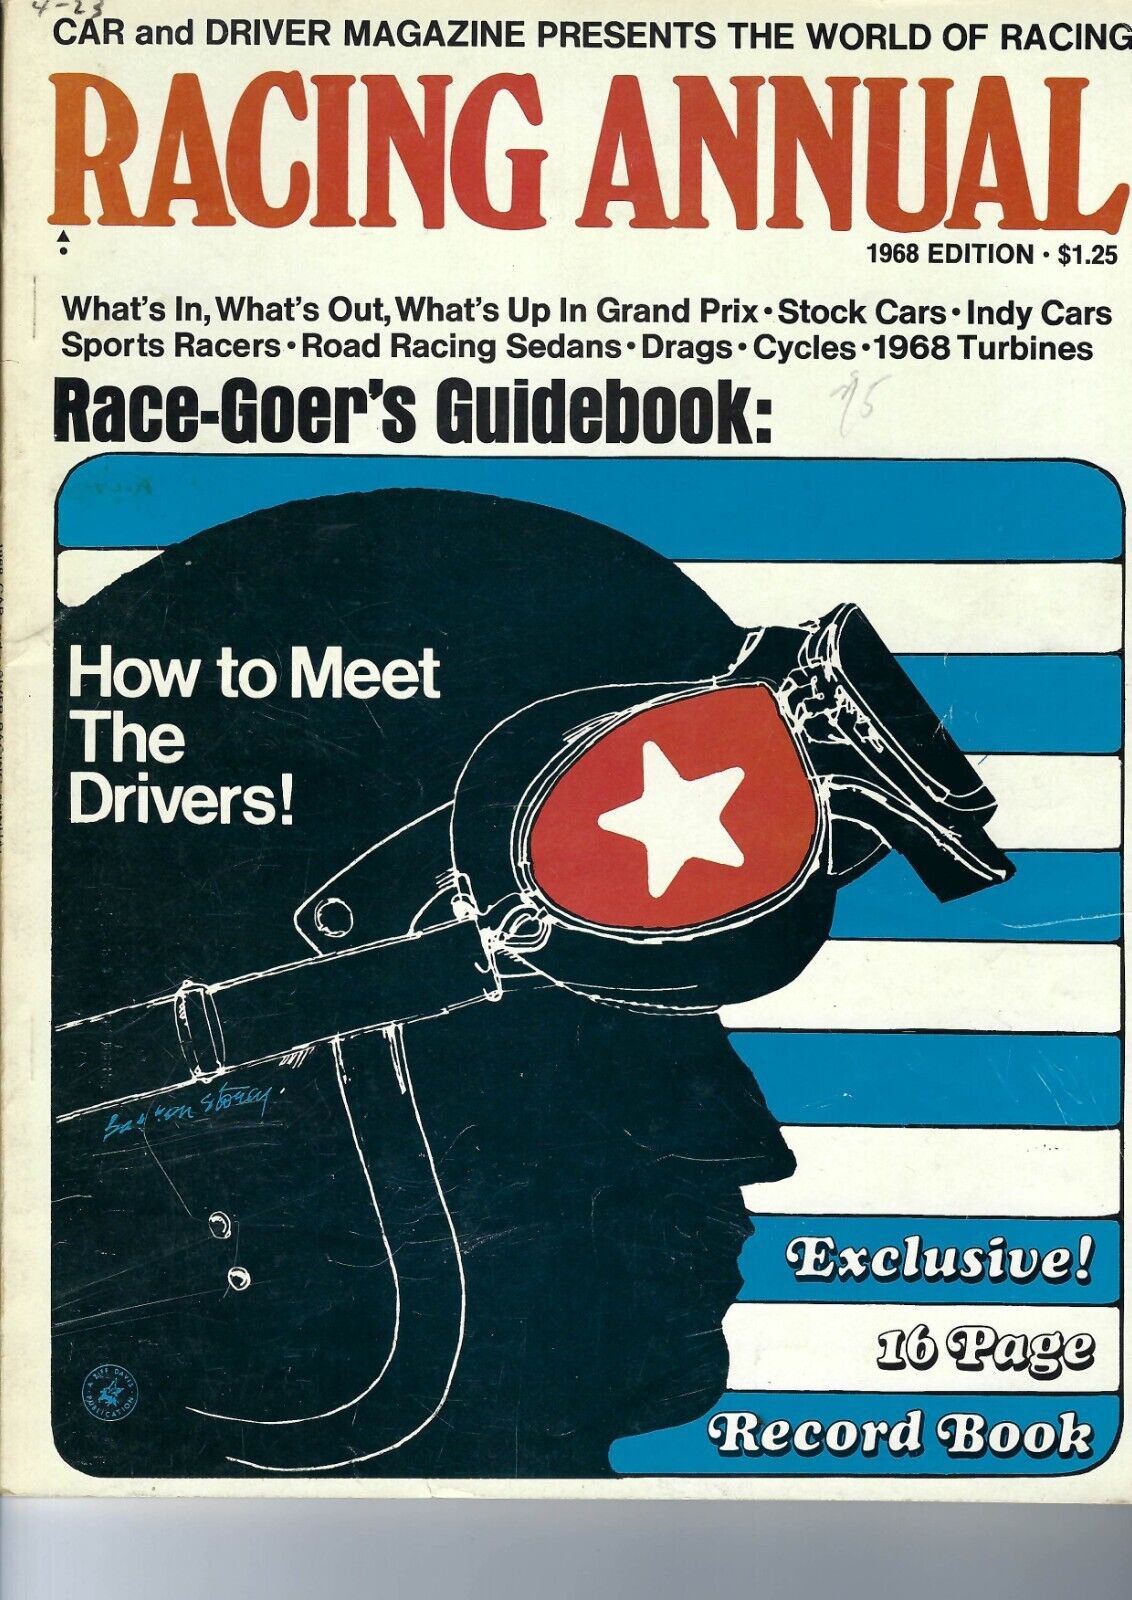 1968 Car and Driver Racing Annual. See Contents. 16 page racing records, more